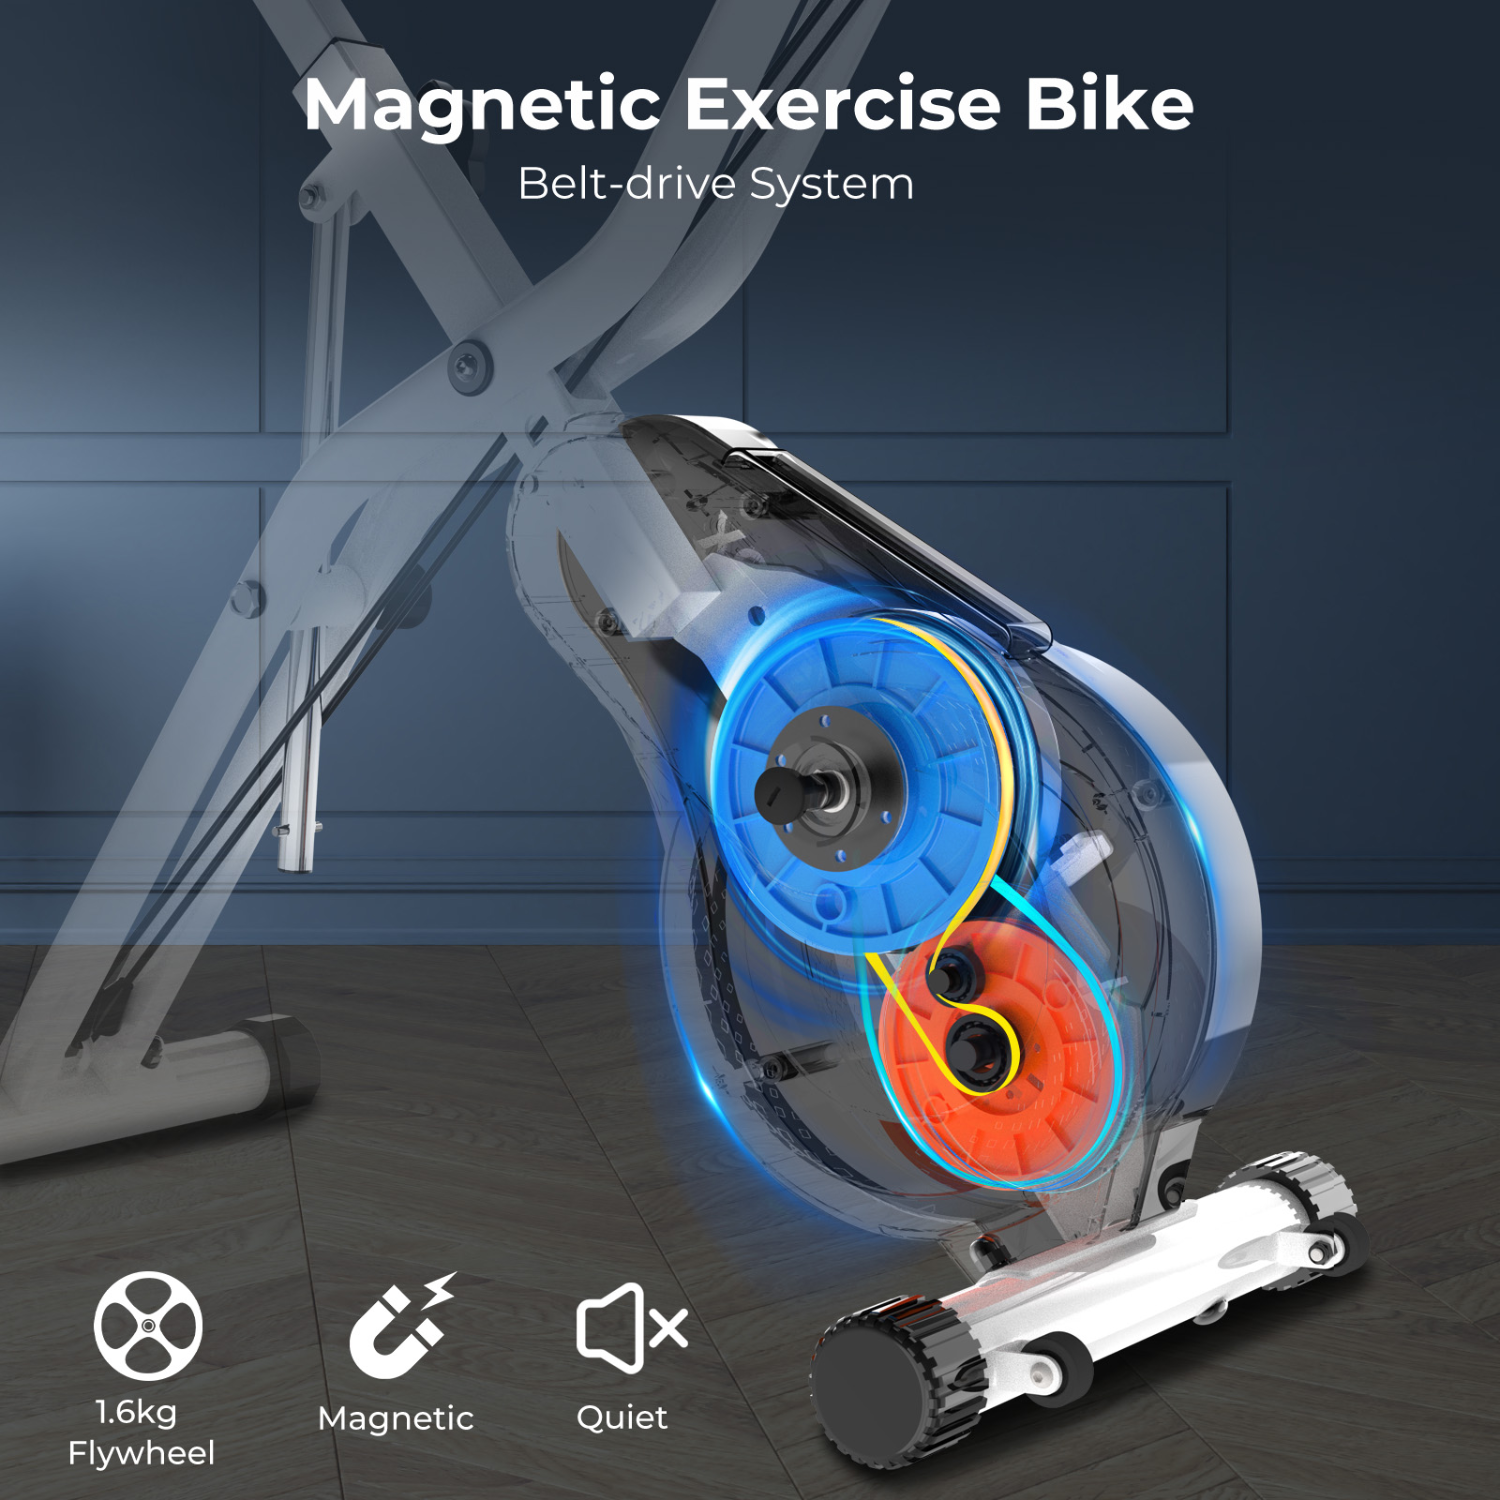 Micyox MX711 Magnetic Foldable Indoor Cycling Bike